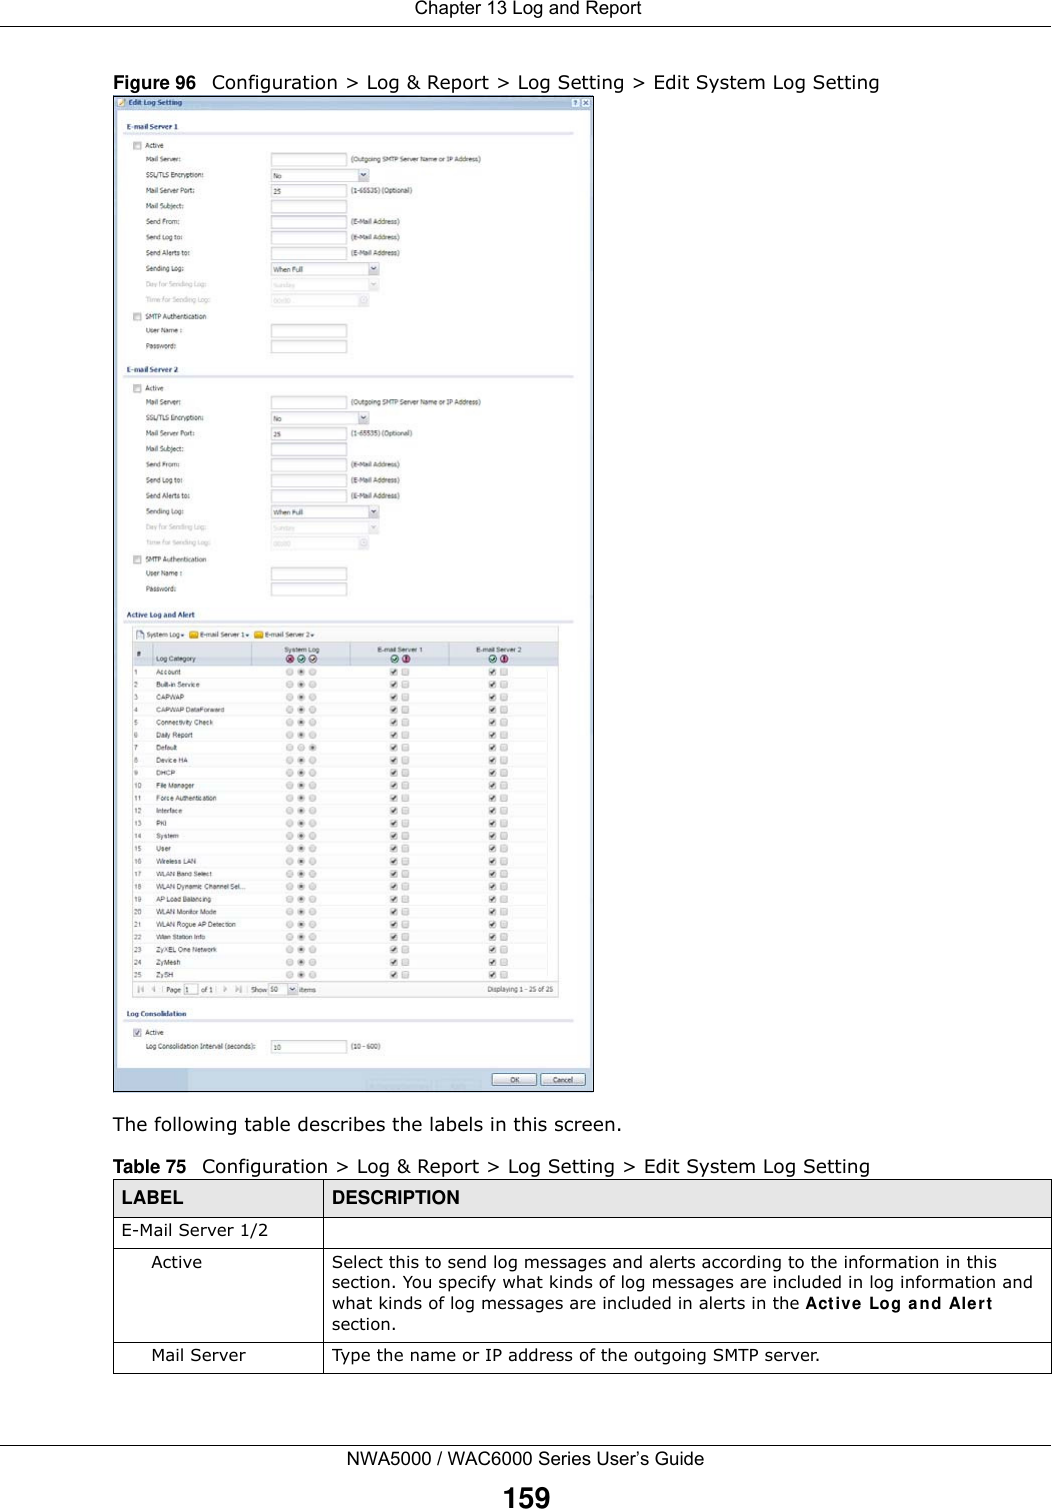  Chapter 13 Log and ReportNWA5000 / WAC6000 Series User’s Guide159Figure 96   Configuration &gt; Log &amp; Report &gt; Log Setting &gt; Edit System Log Setting  The following table describes the labels in this screen. Table 75   Configuration &gt; Log &amp; Report &gt; Log Setting &gt; Edit System Log SettingLABEL DESCRIPTIONE-Mail Server 1/2Active Select this to send log messages and alerts according to the information in this section. You specify what kinds of log messages are included in log information and what kinds of log messages are included in alerts in the Active Log and Alert section.Mail Server Type the name or IP address of the outgoing SMTP server.